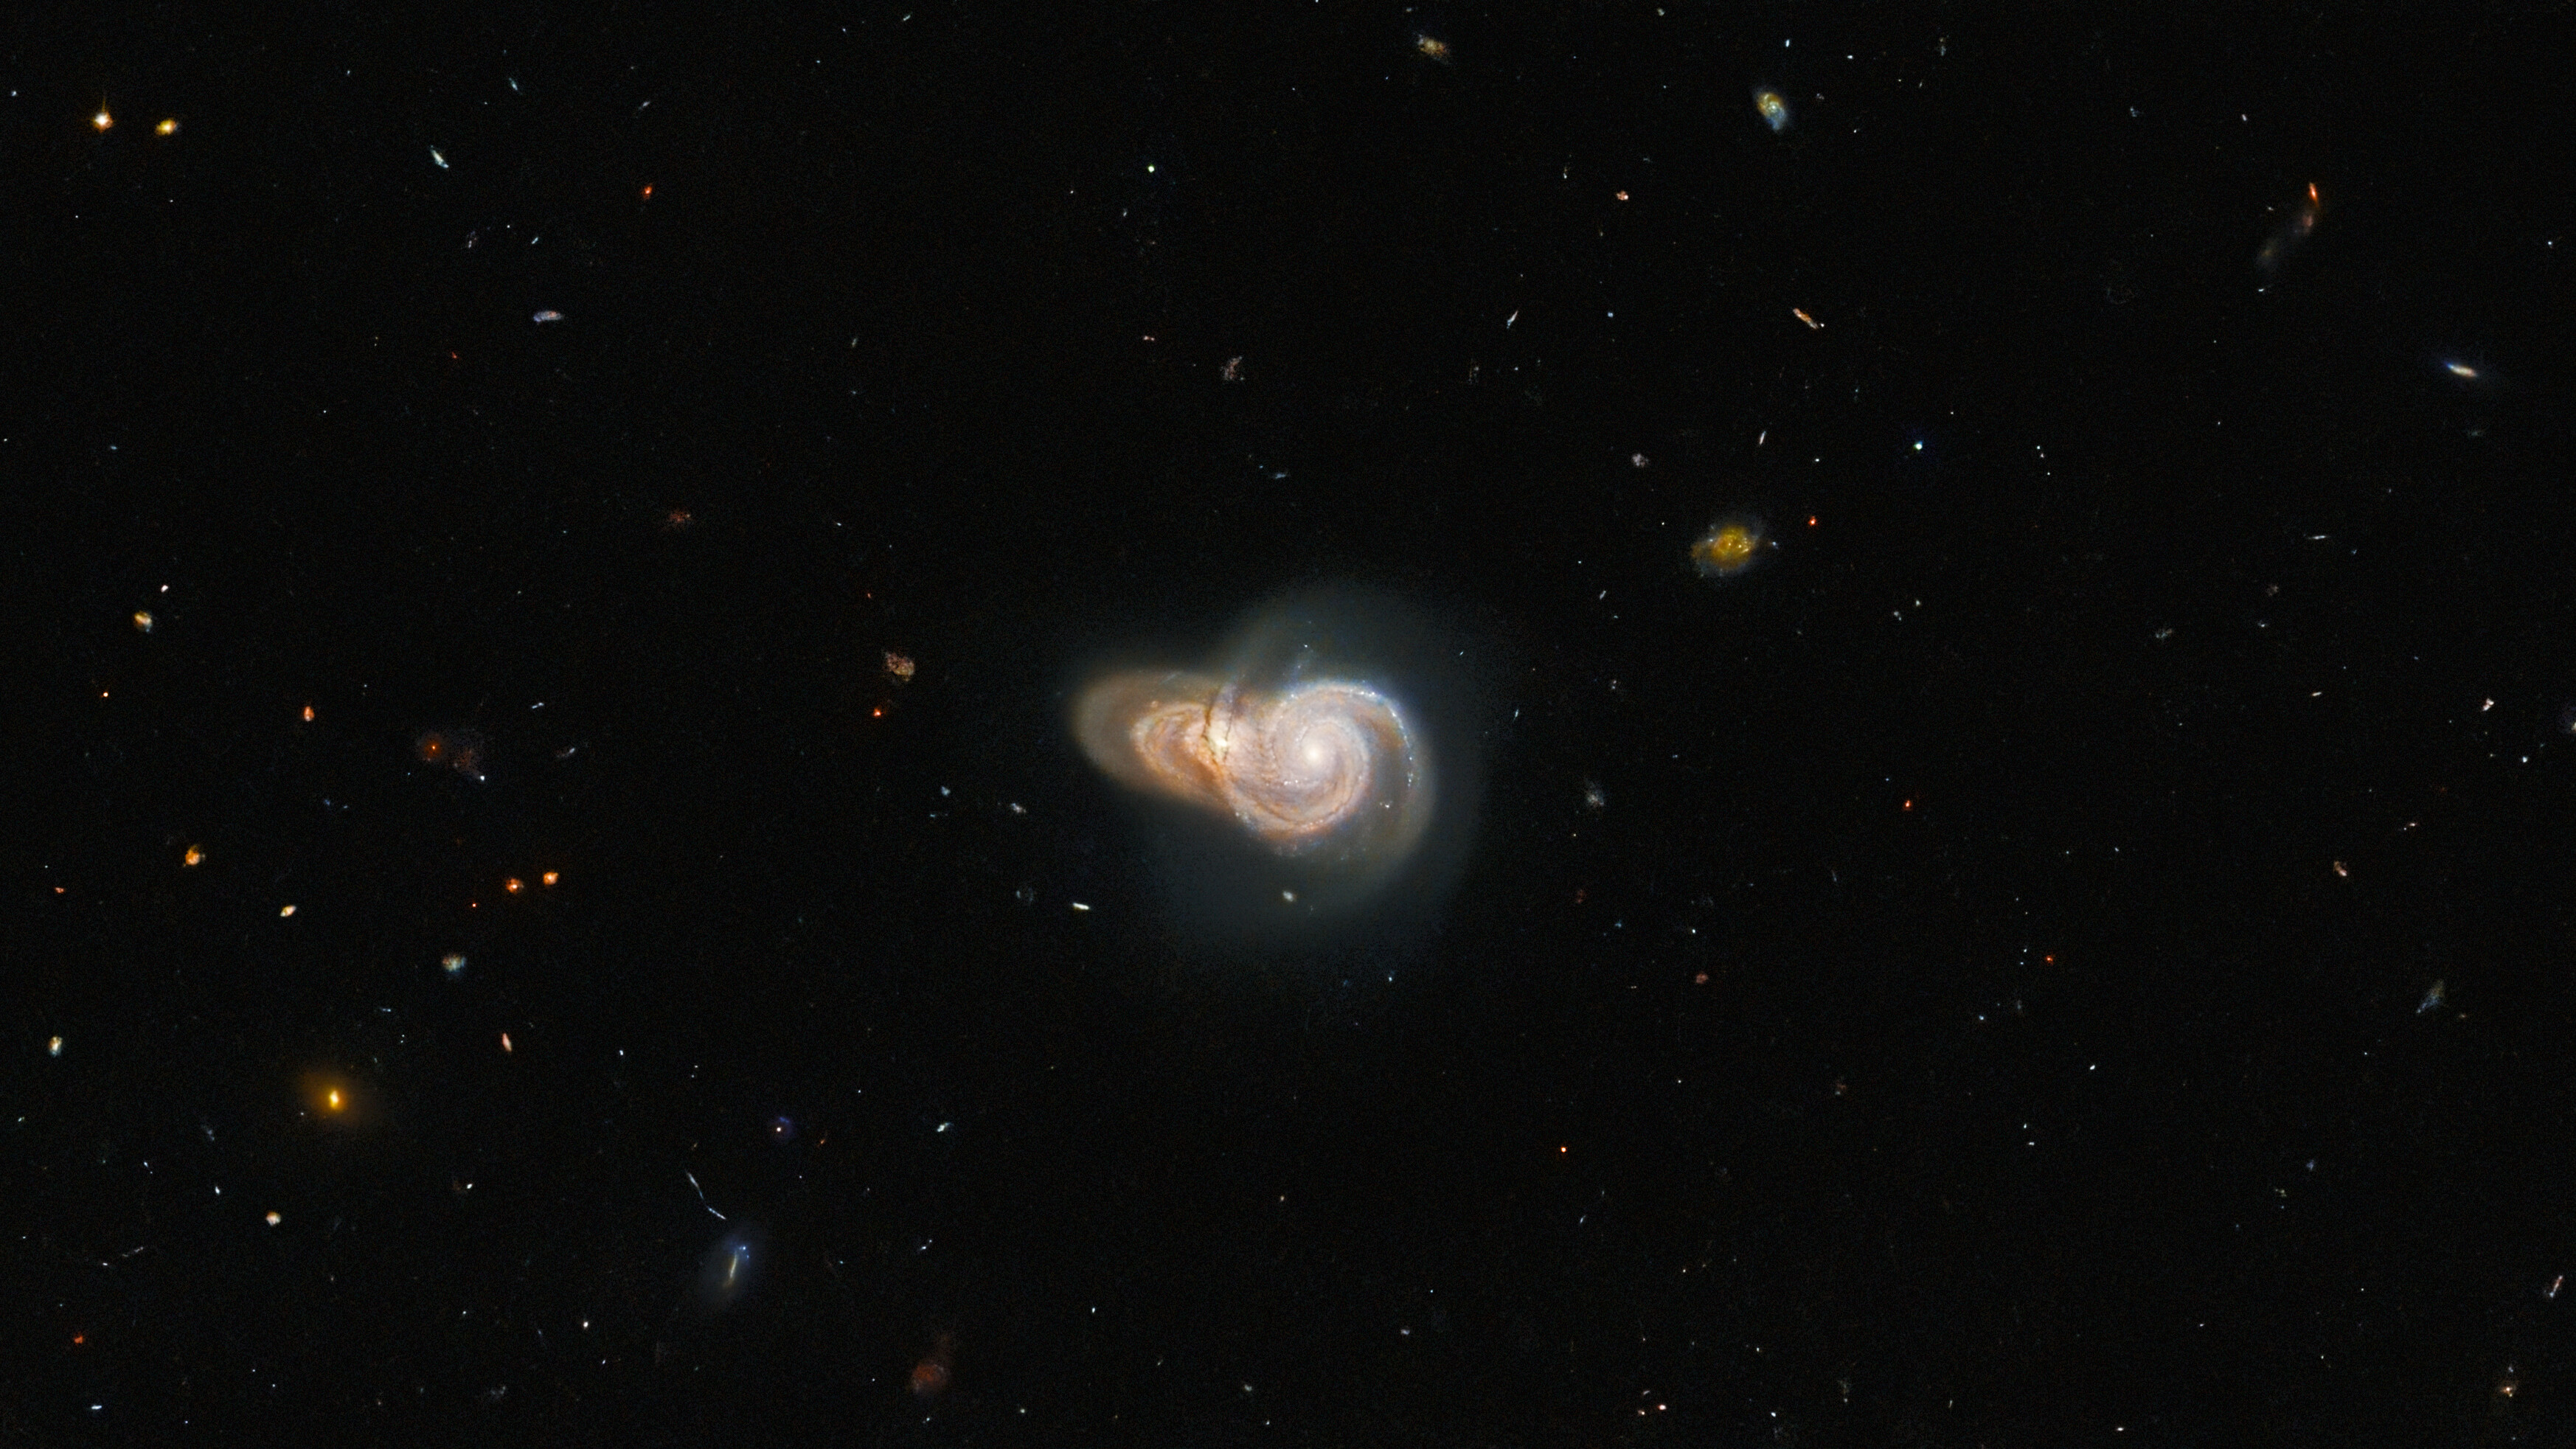 Hubble image shows two overlapping galaxies